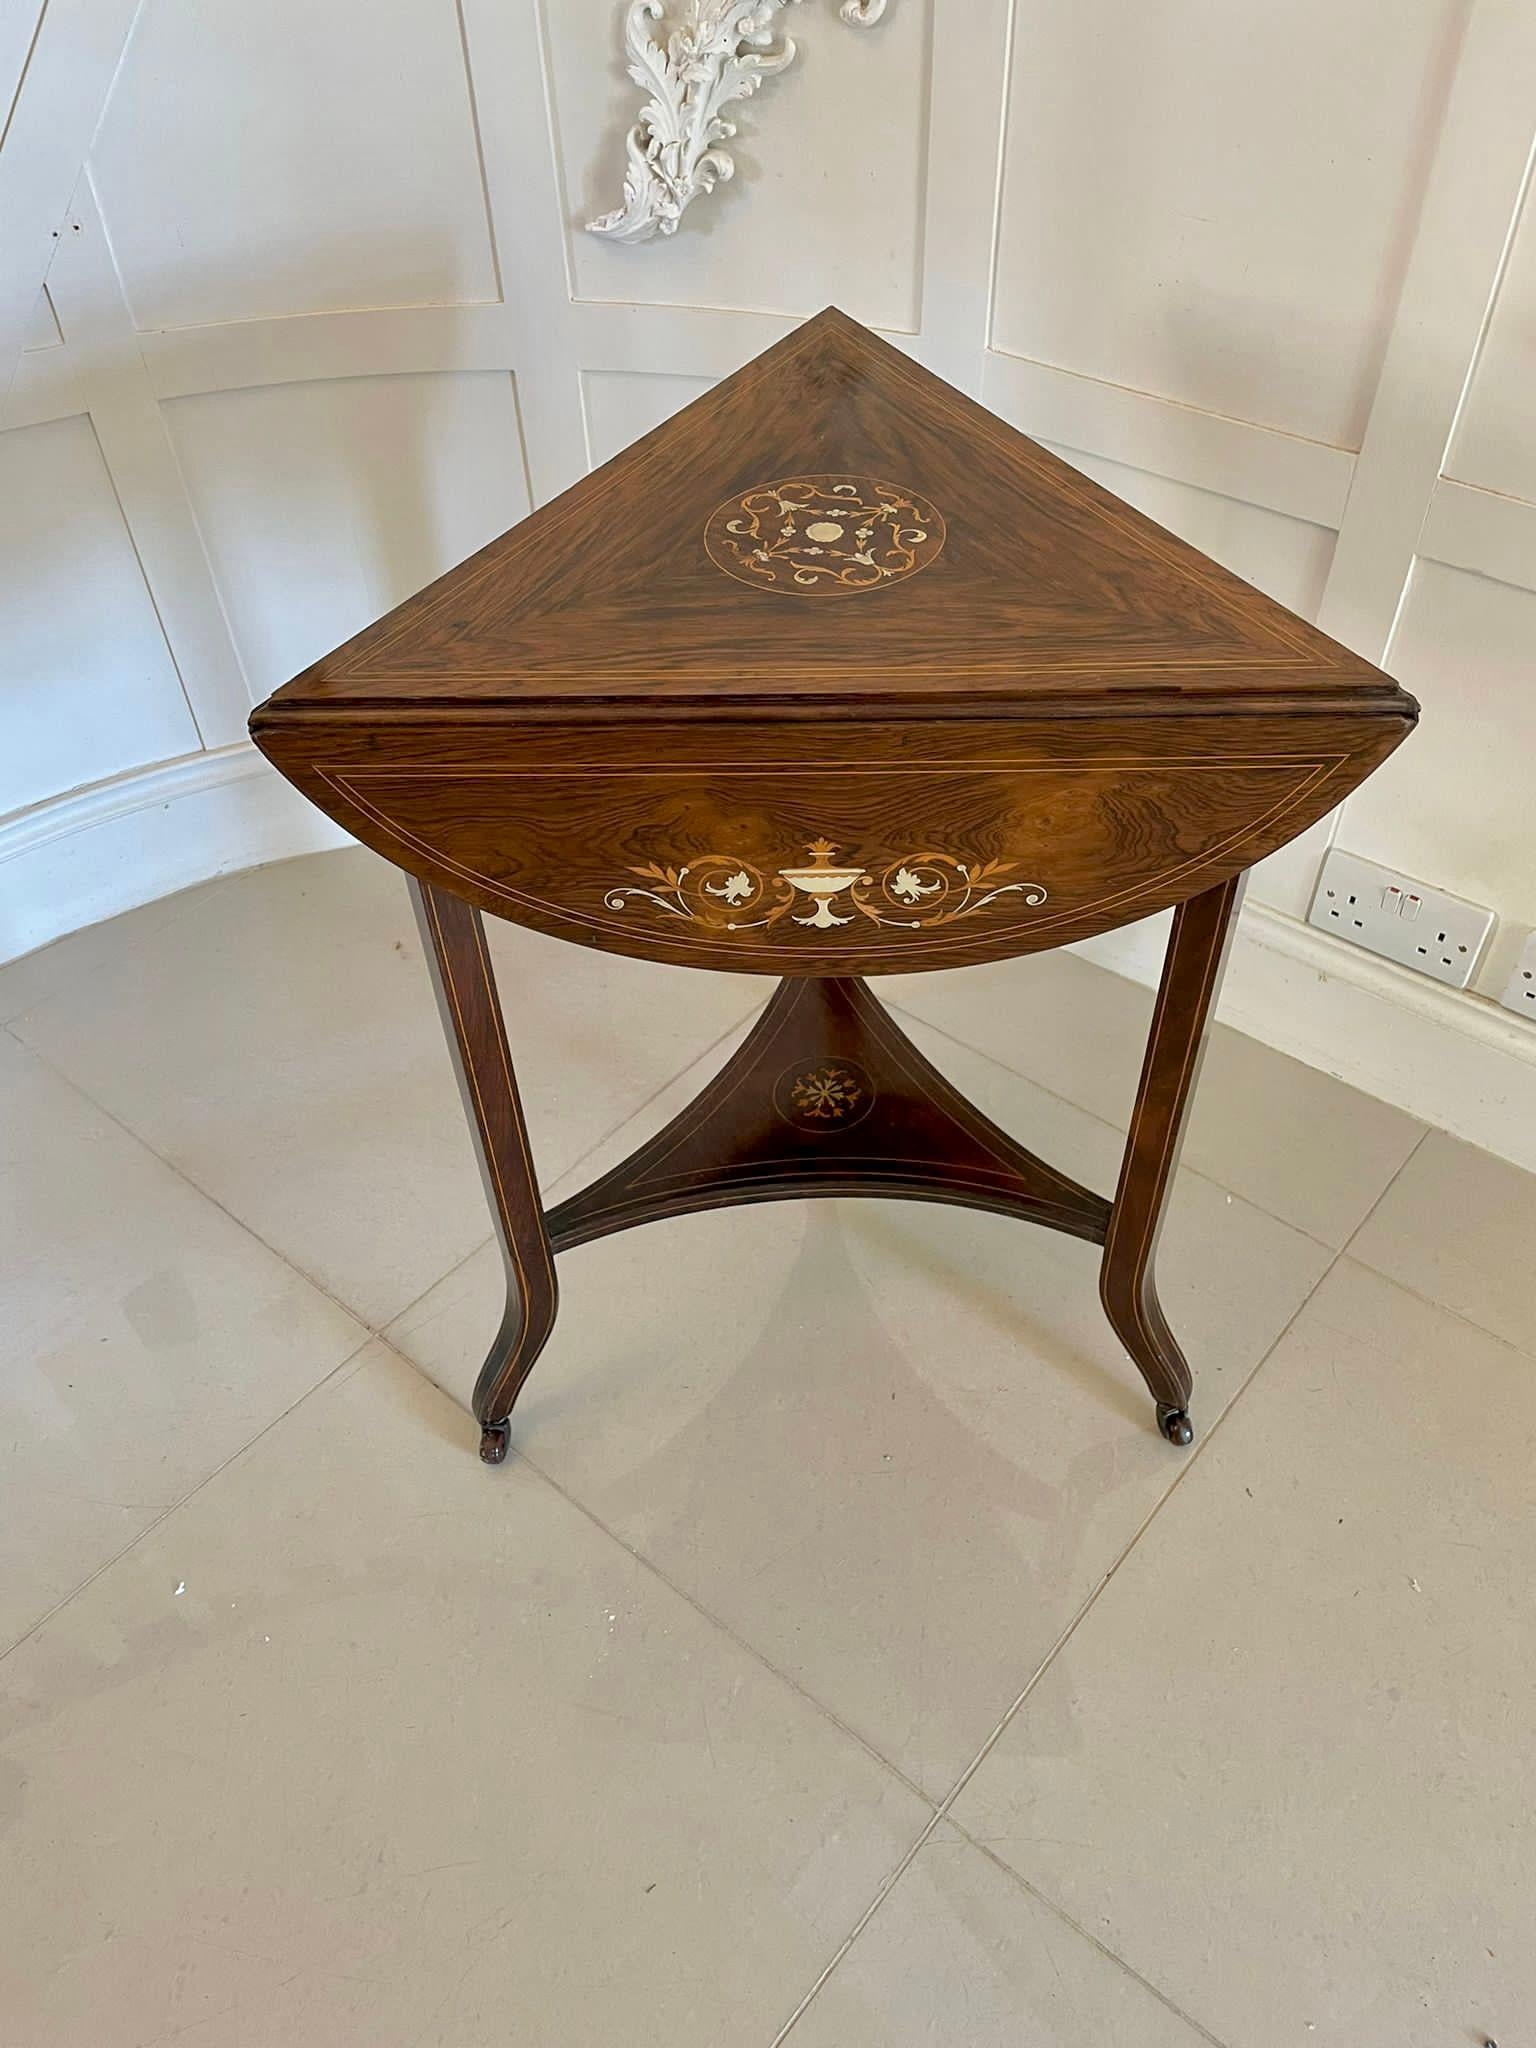 Unusual Antique Edwardian Quality Rosewood Inlaid Drop Leaf Centre Table For Sale 2